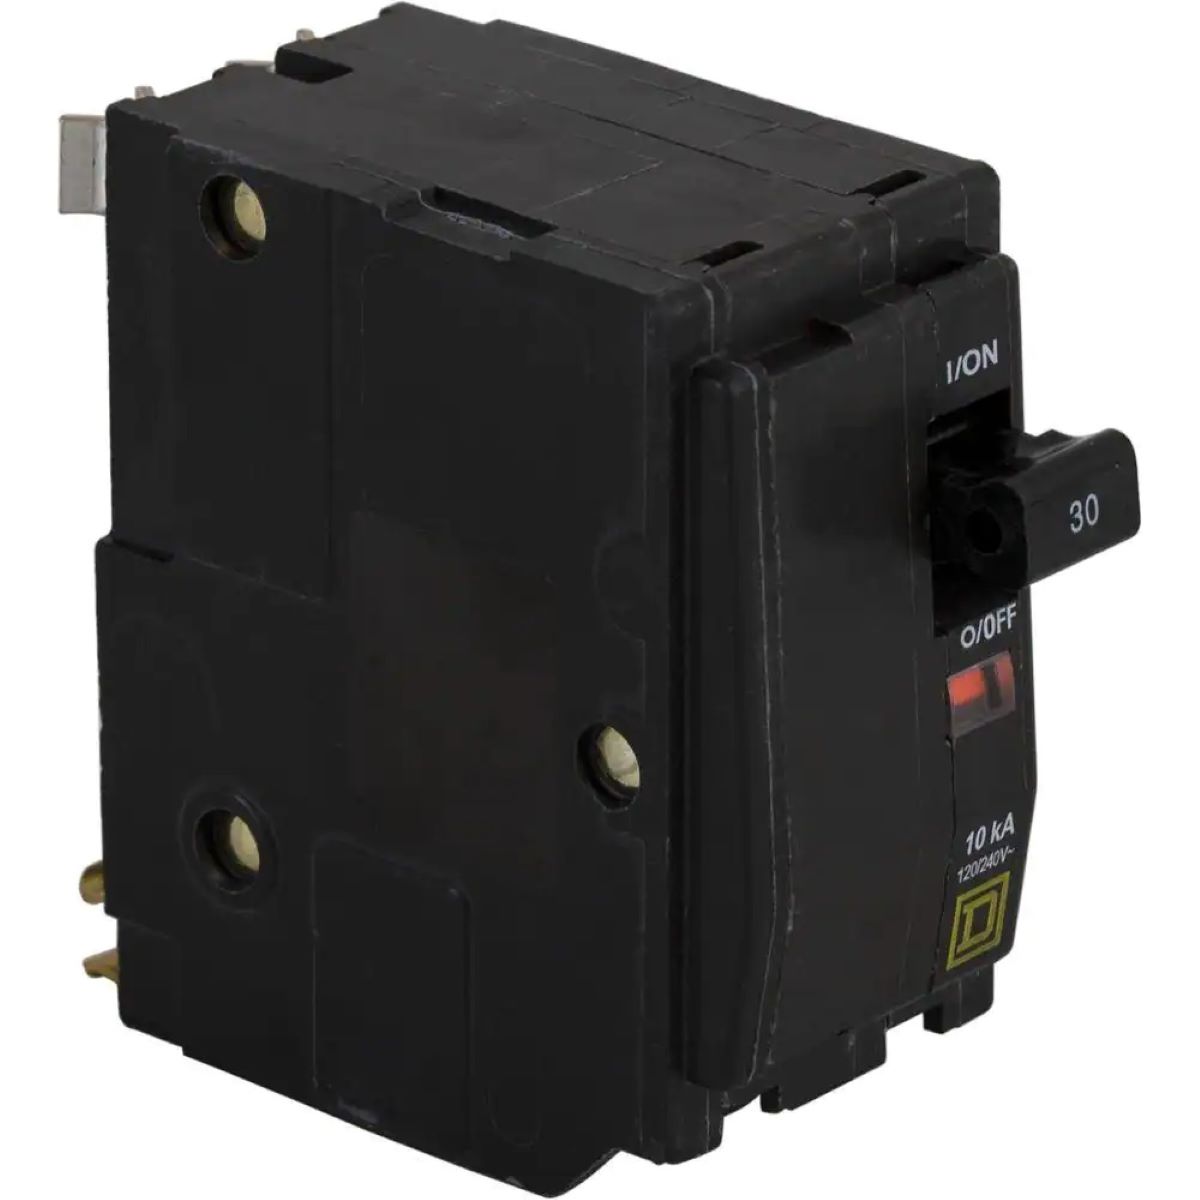 What Circuit Breakers Are Compatible With Square D